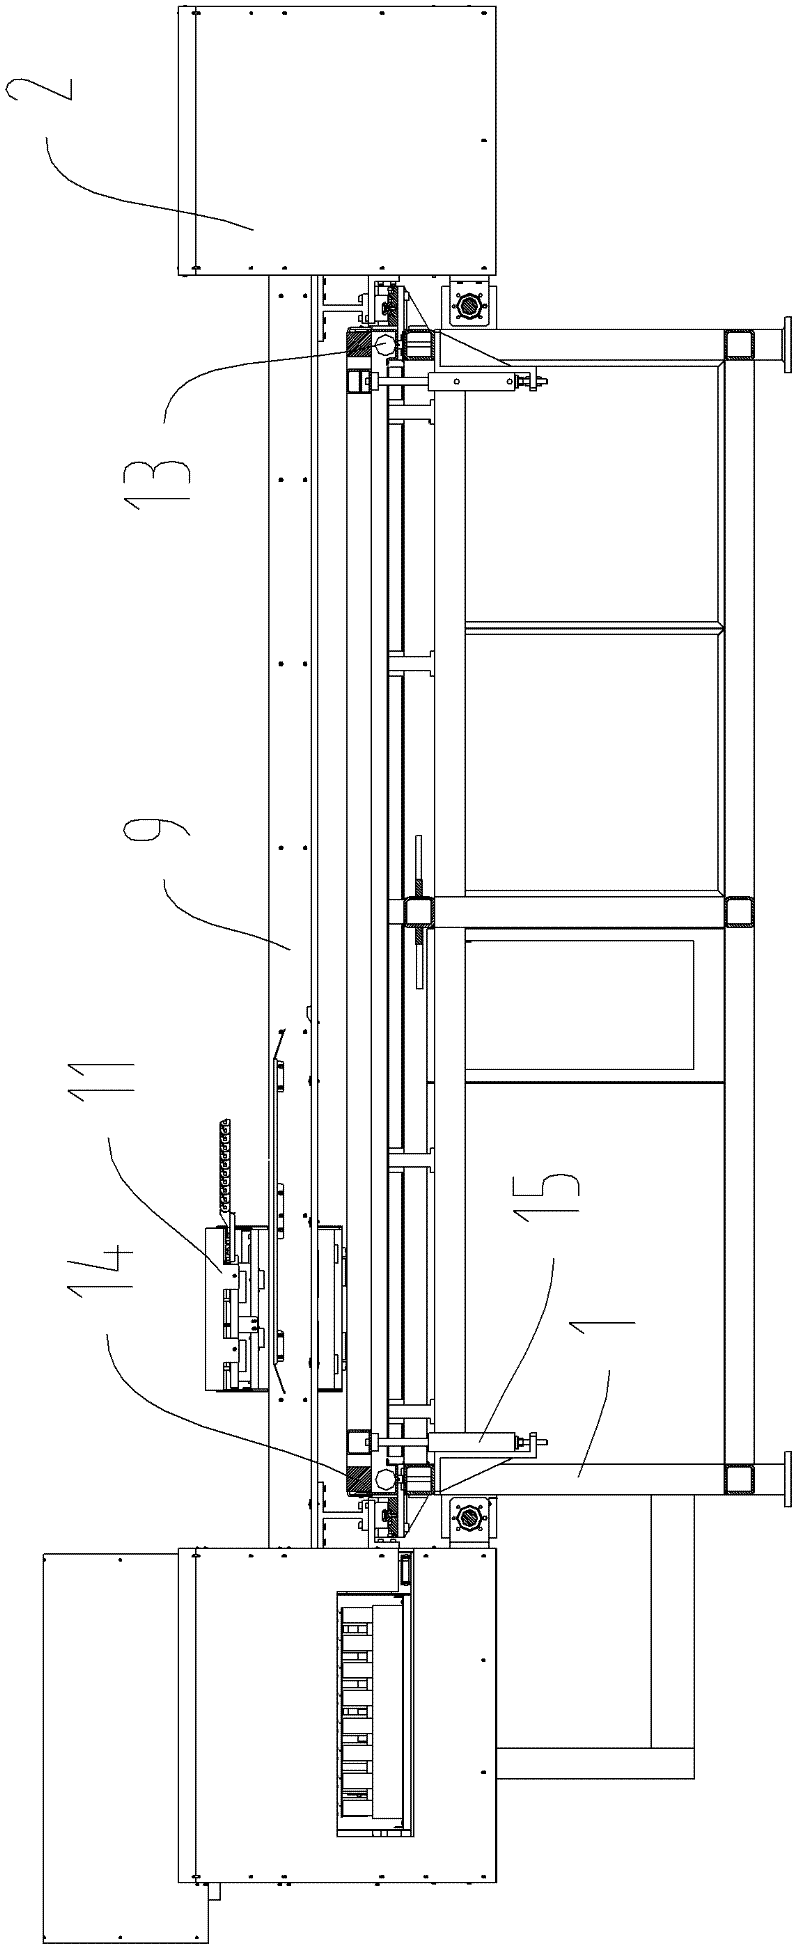 Continuous type platform printing device